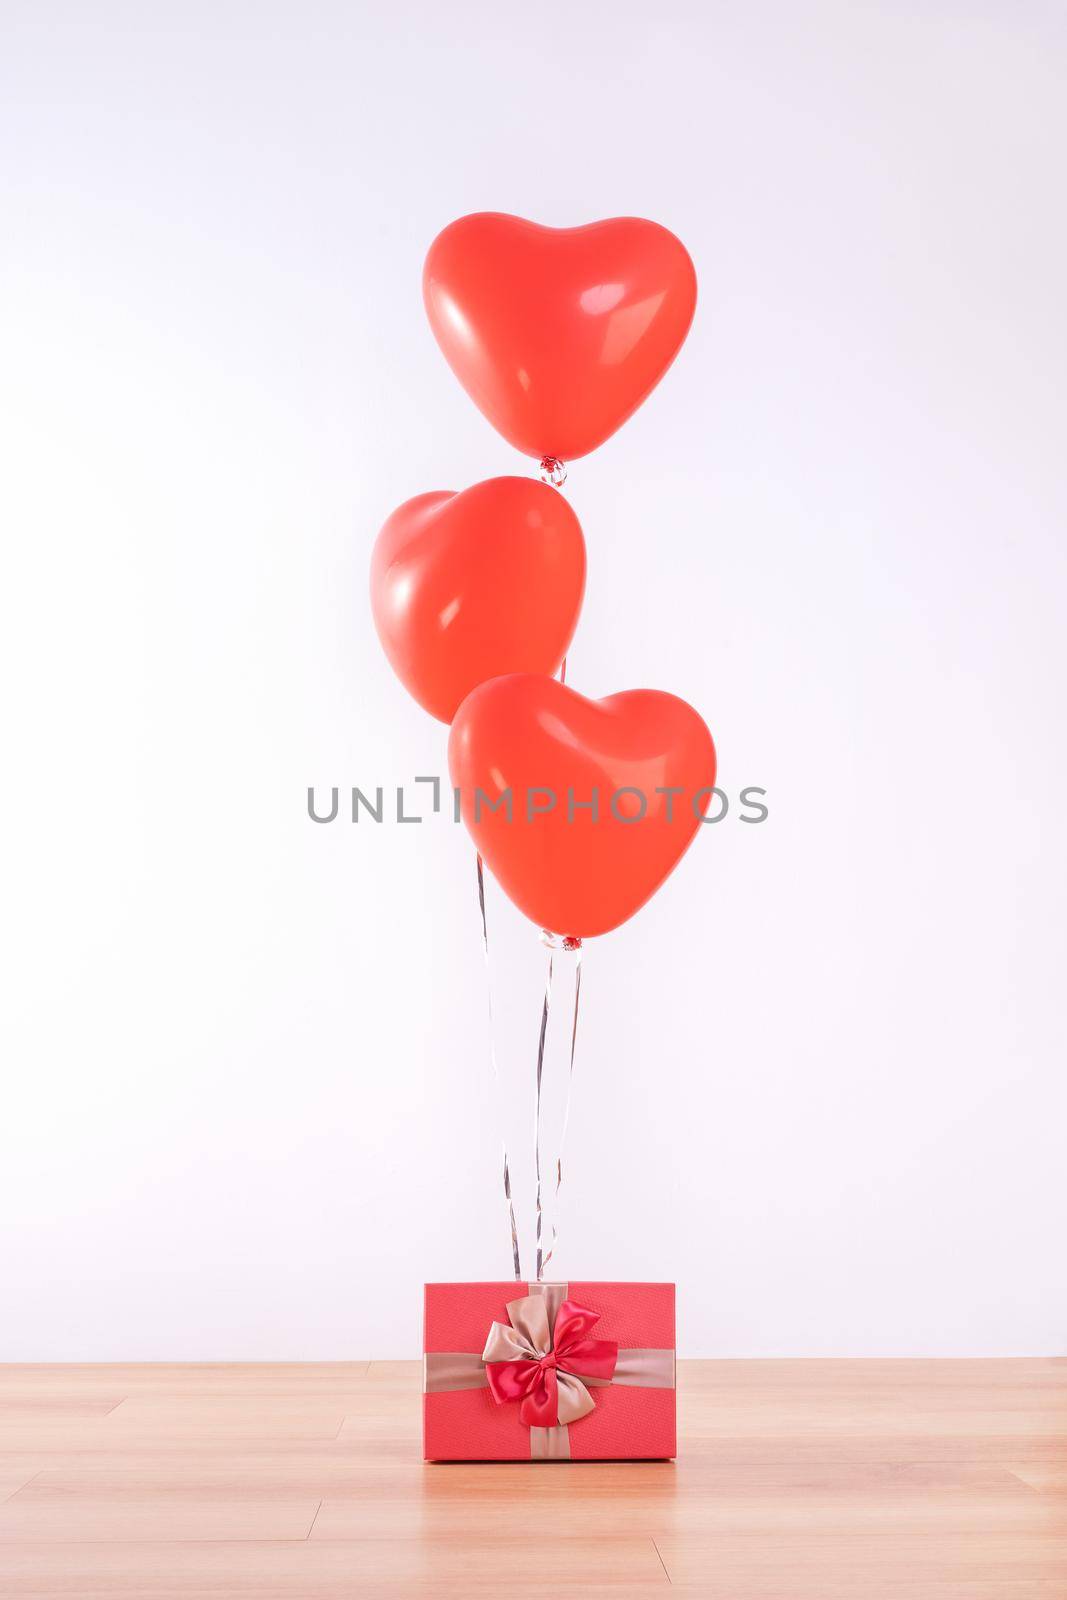 Valentine's day, Mother's day, birthday design concept - Heart helium balloon with gift box on a light wood floor, white wall background, close up.